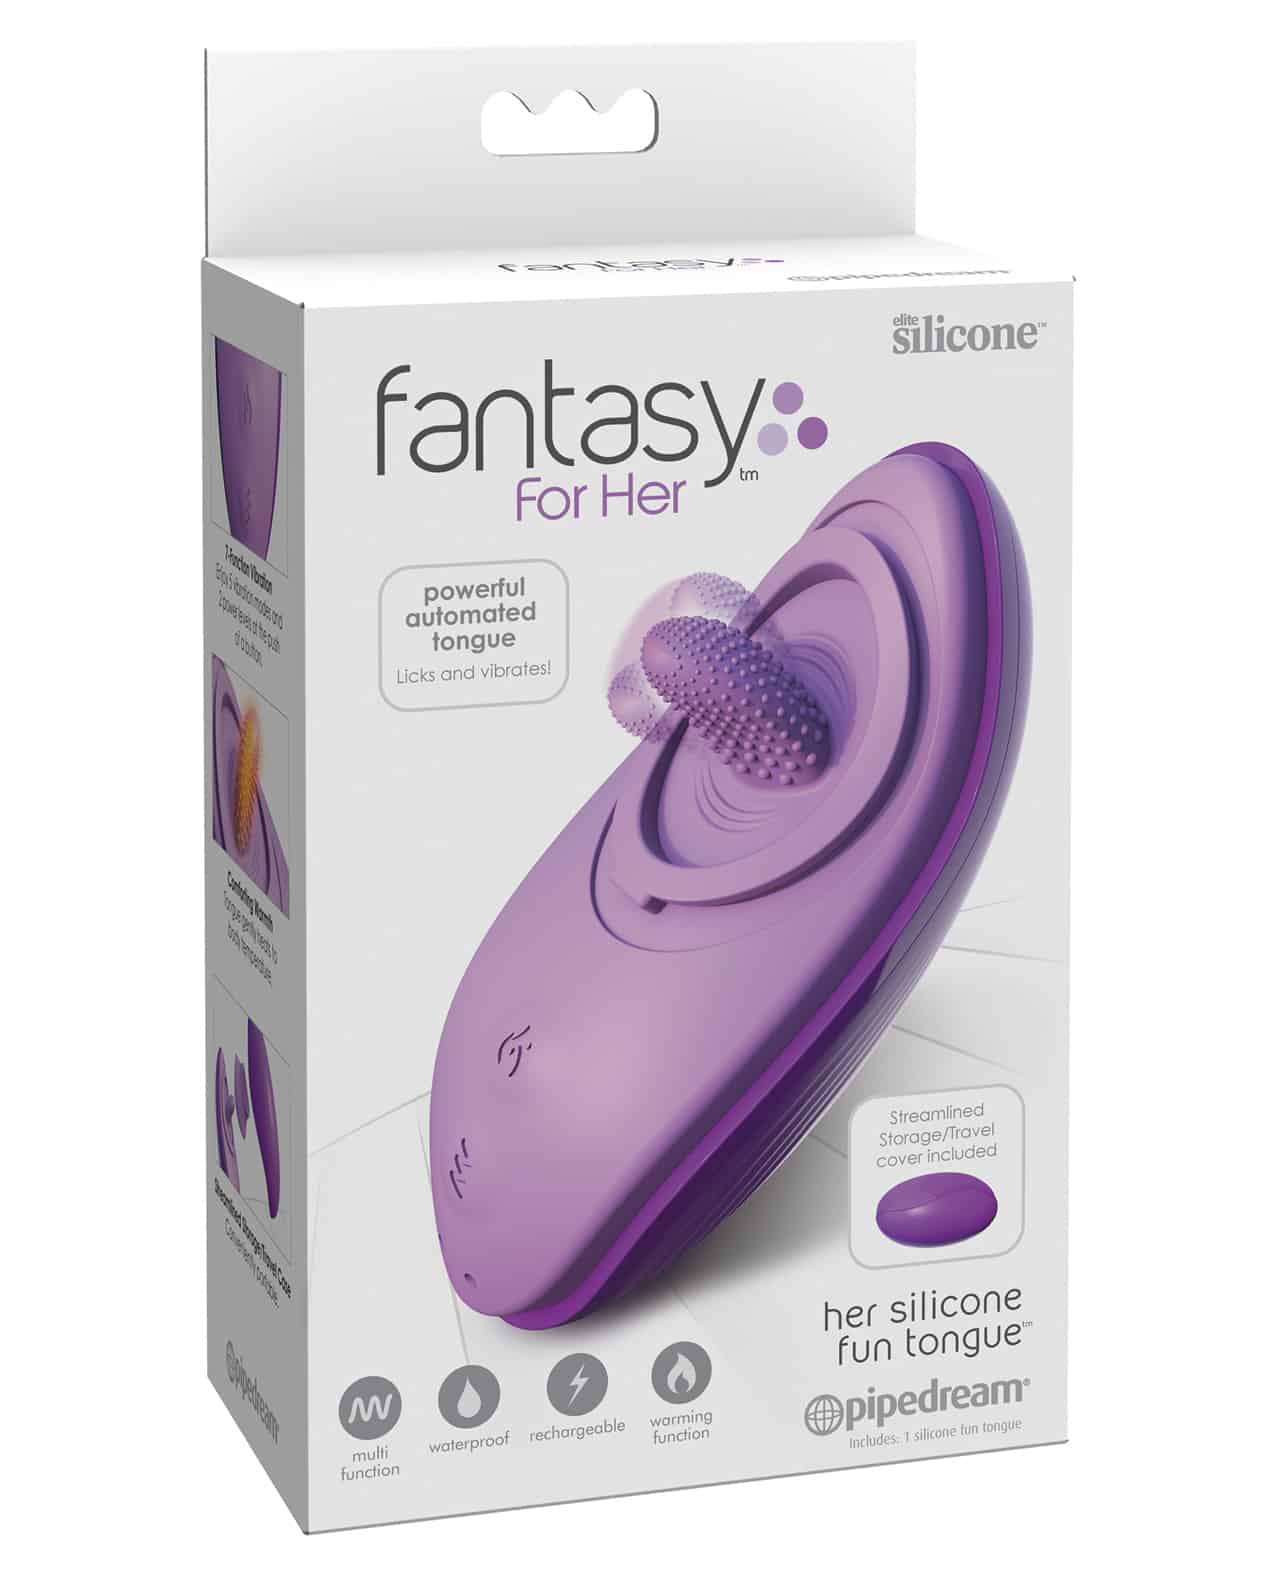 Fantasy vibrator first review